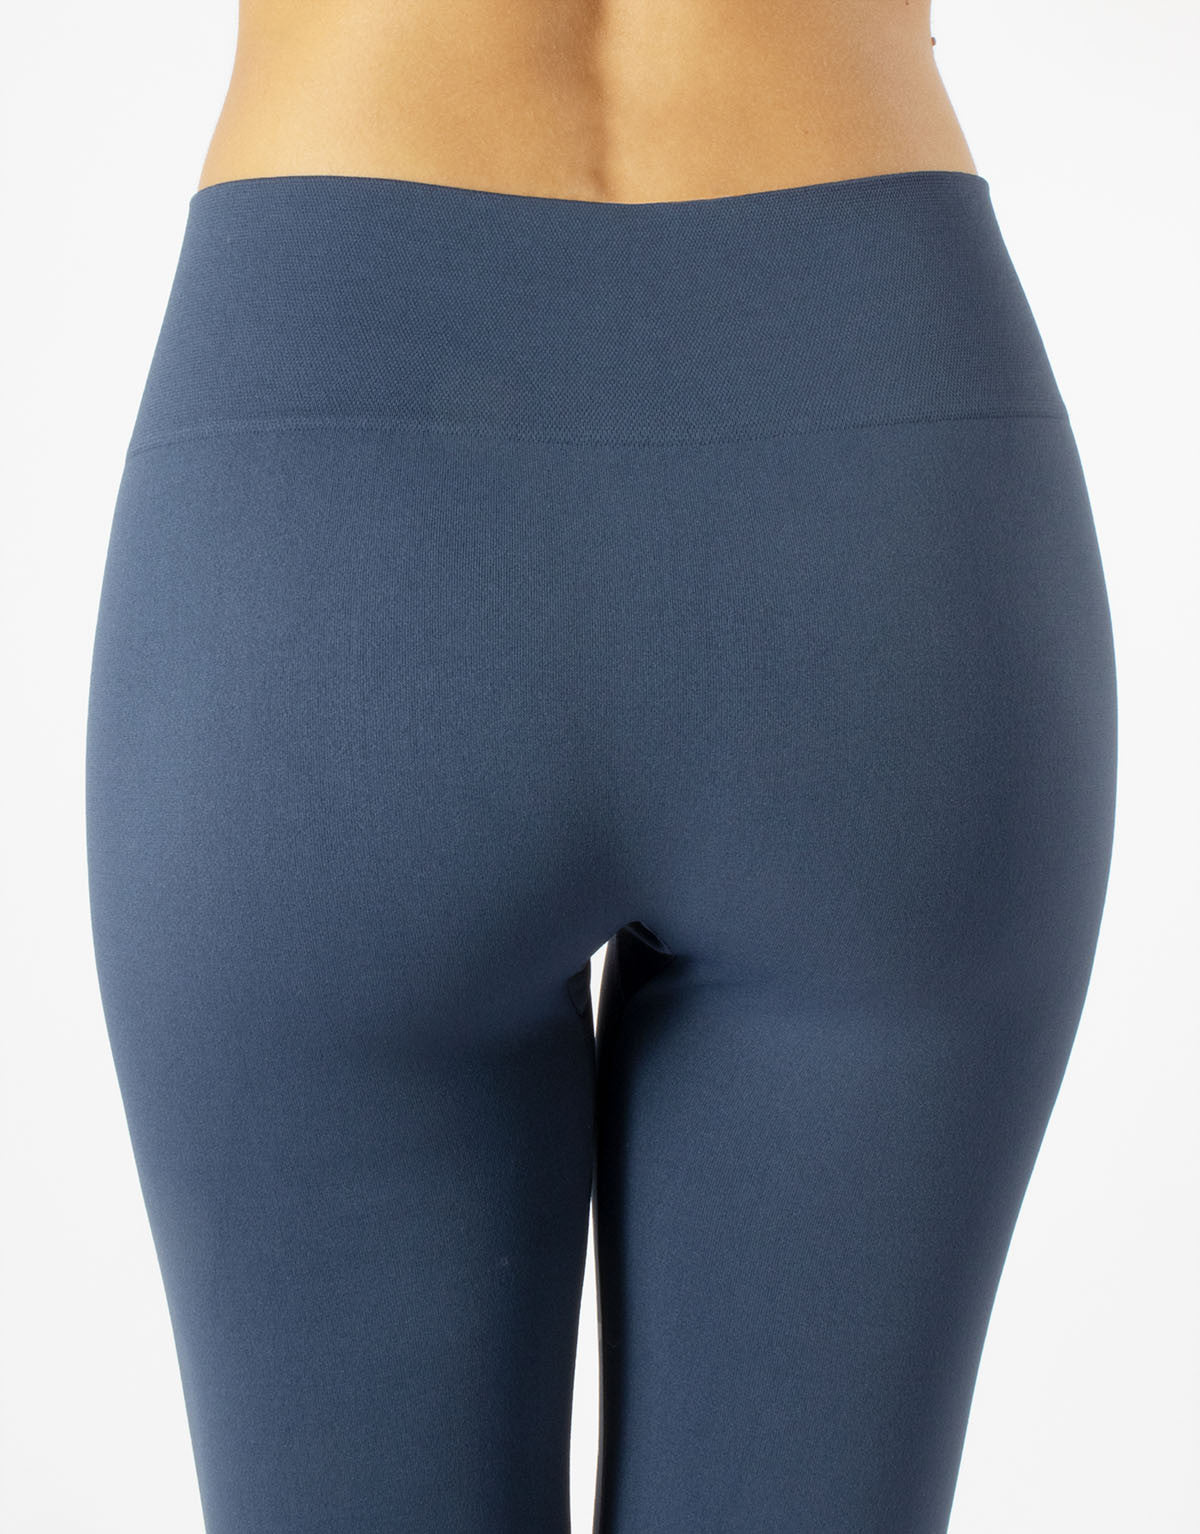 Calzitaly Seamless Leggings - Soft and plain denim blue leggings with a deep elasticated waist band and gusset for a comfortable fit.